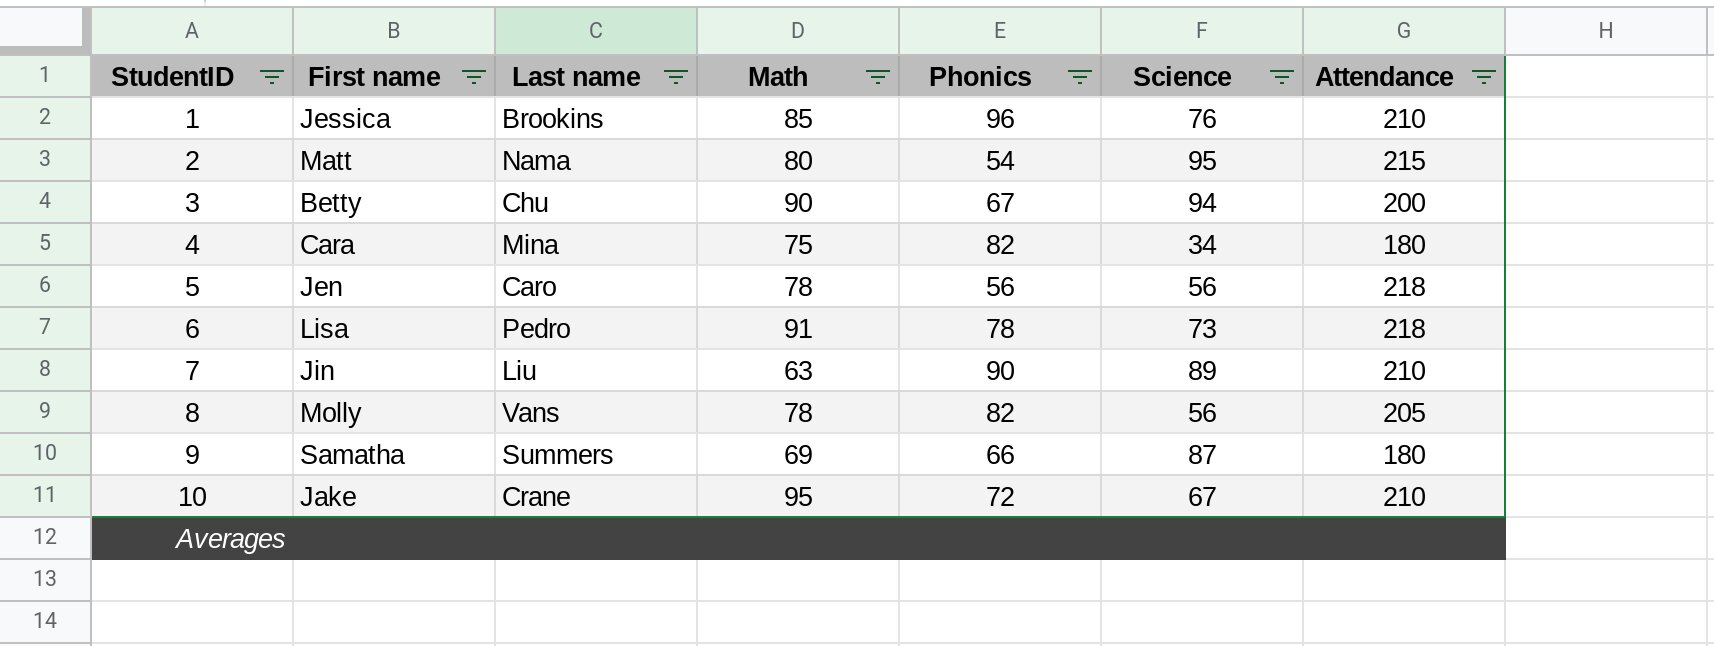 How To Make Table In Google Sheets